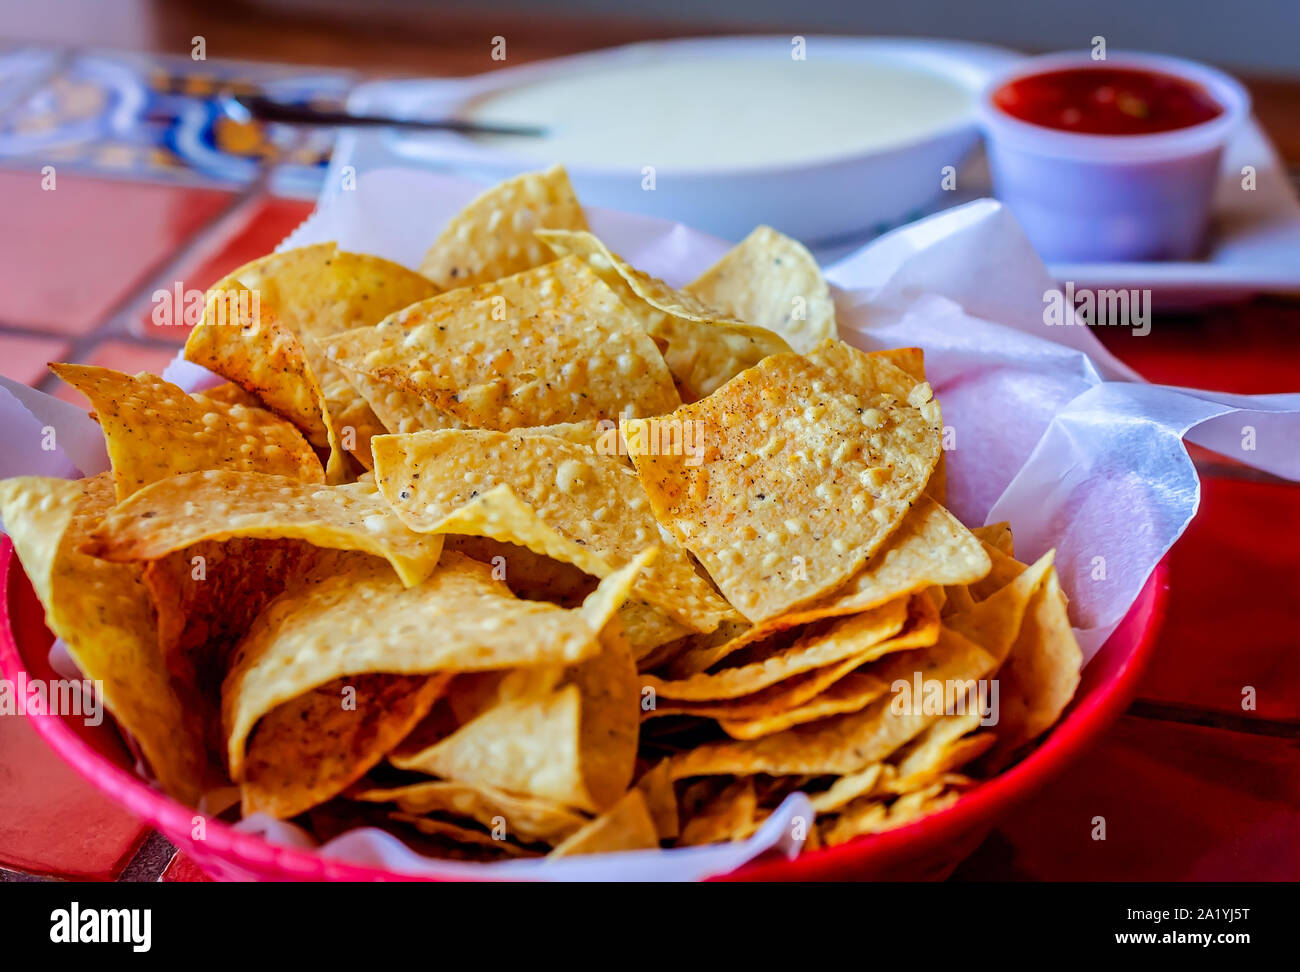 Complimentary tortilla chips are provided with salsa and an add-on order of queso cheese dip, Aug. 16, 2019, in Magee, Mississippi. Stock Photo